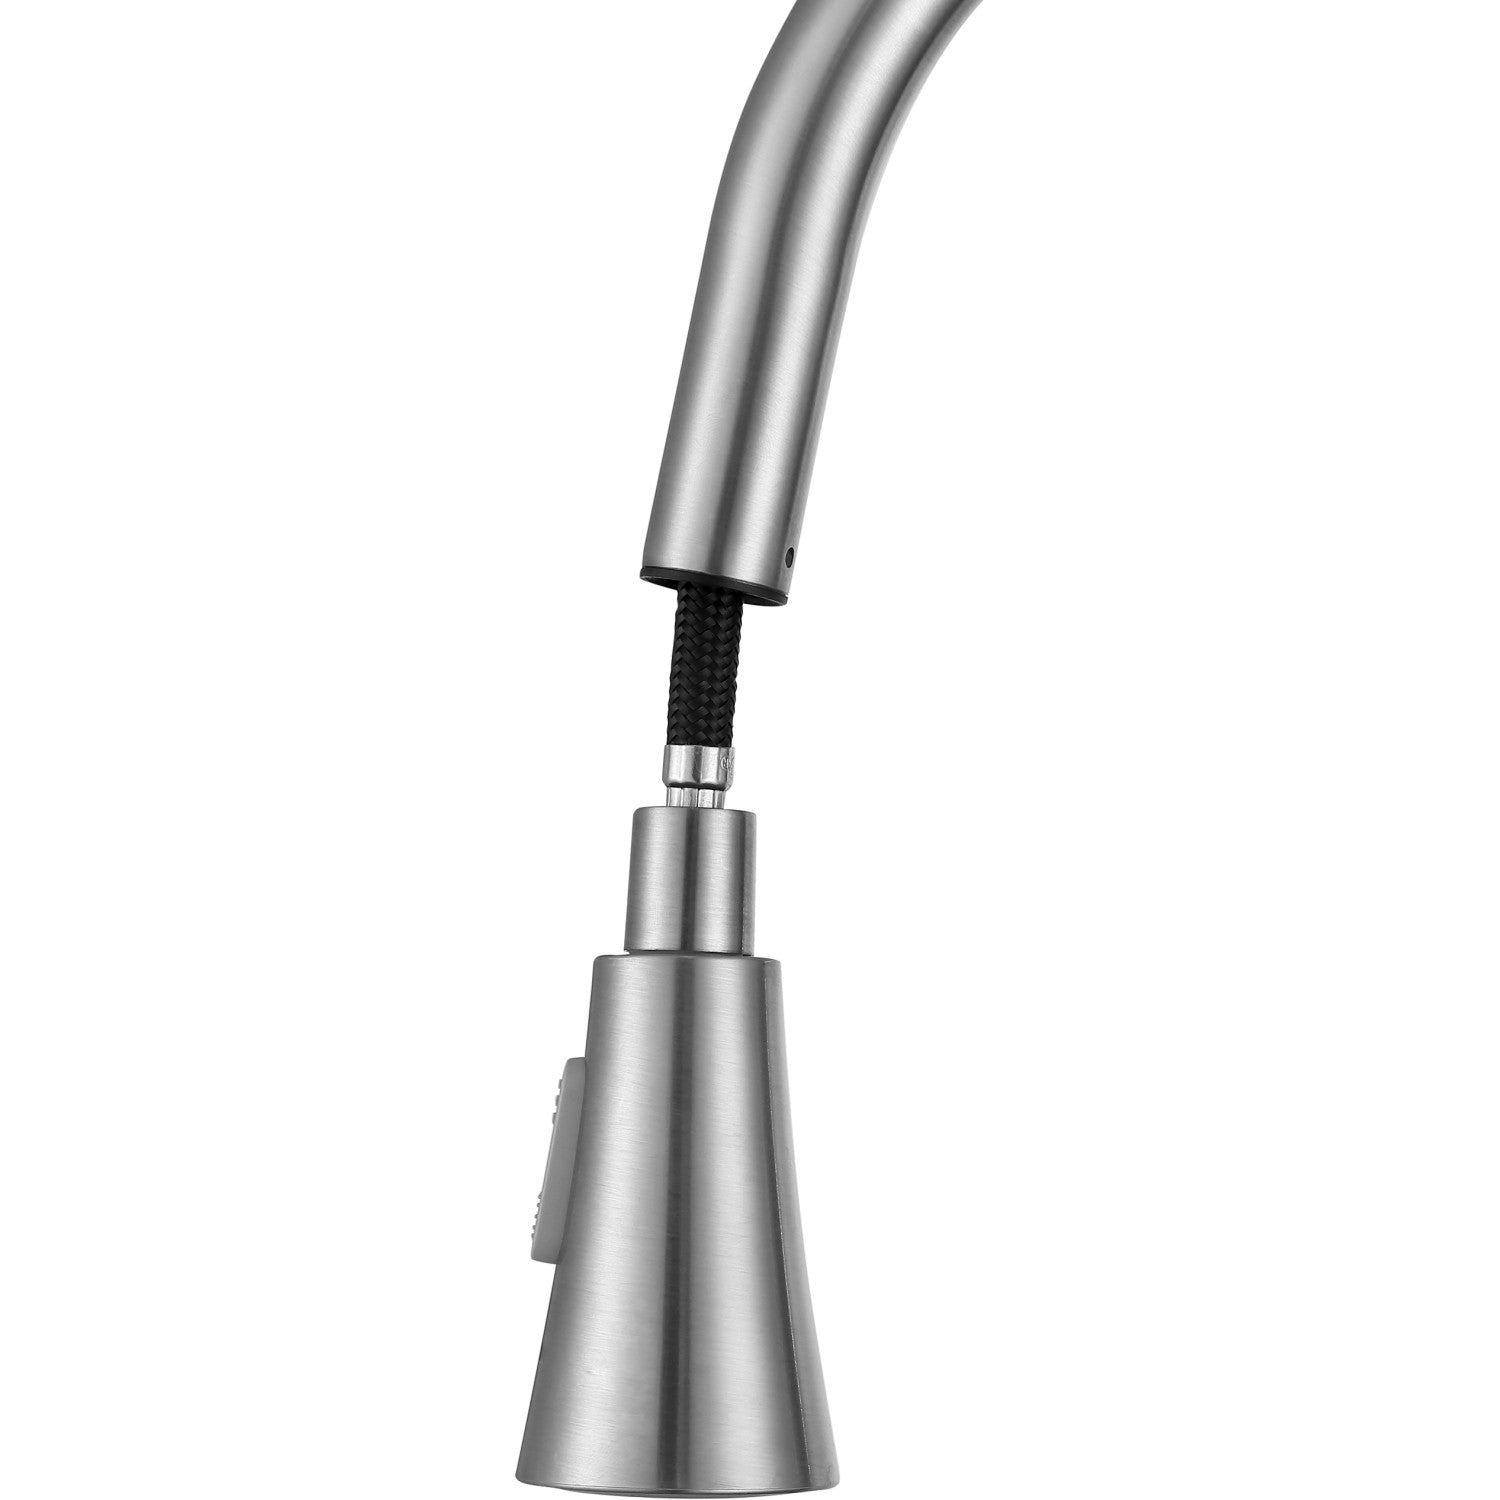 ANZZI Rodeo Series Single Hole Brushed Nickel Kitchen Faucet With Euro-Grip Pull Down Sprayer